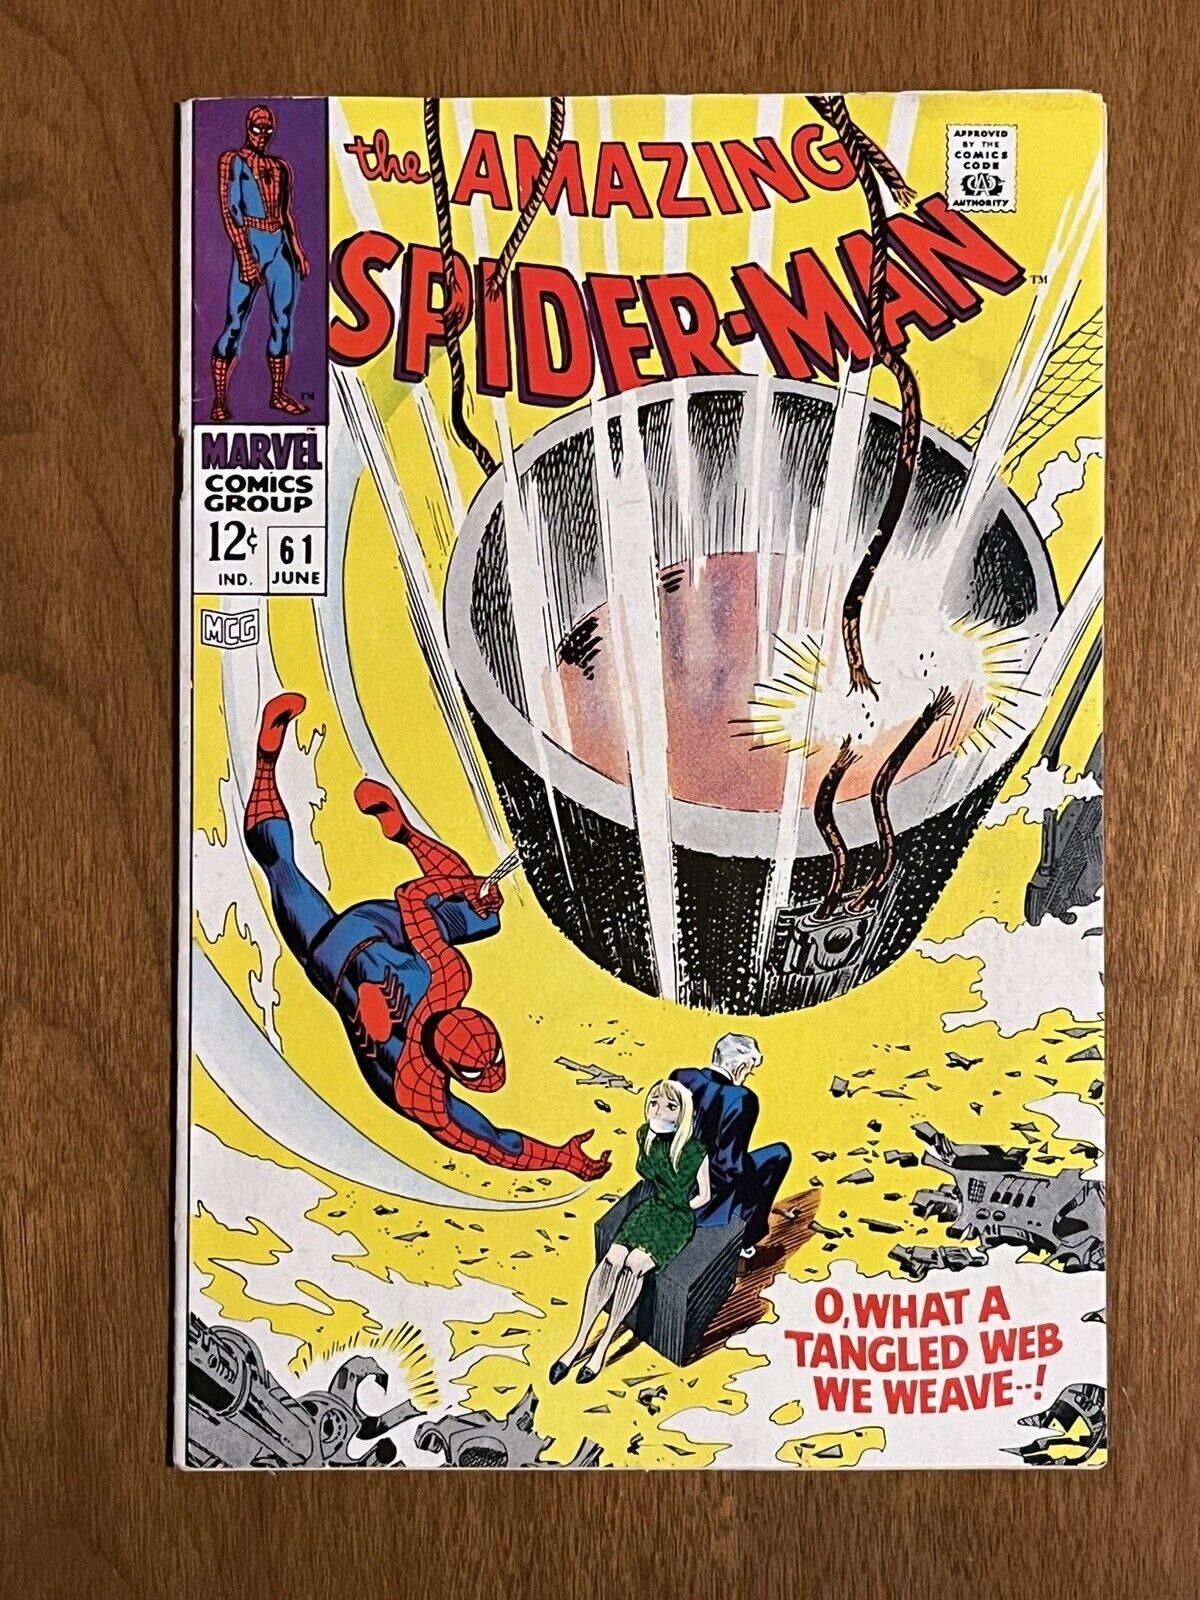 The Amazing Spider-Man #61/Silver Age Marvel Comic Book/1st Gwen Stacy Cover/FVF